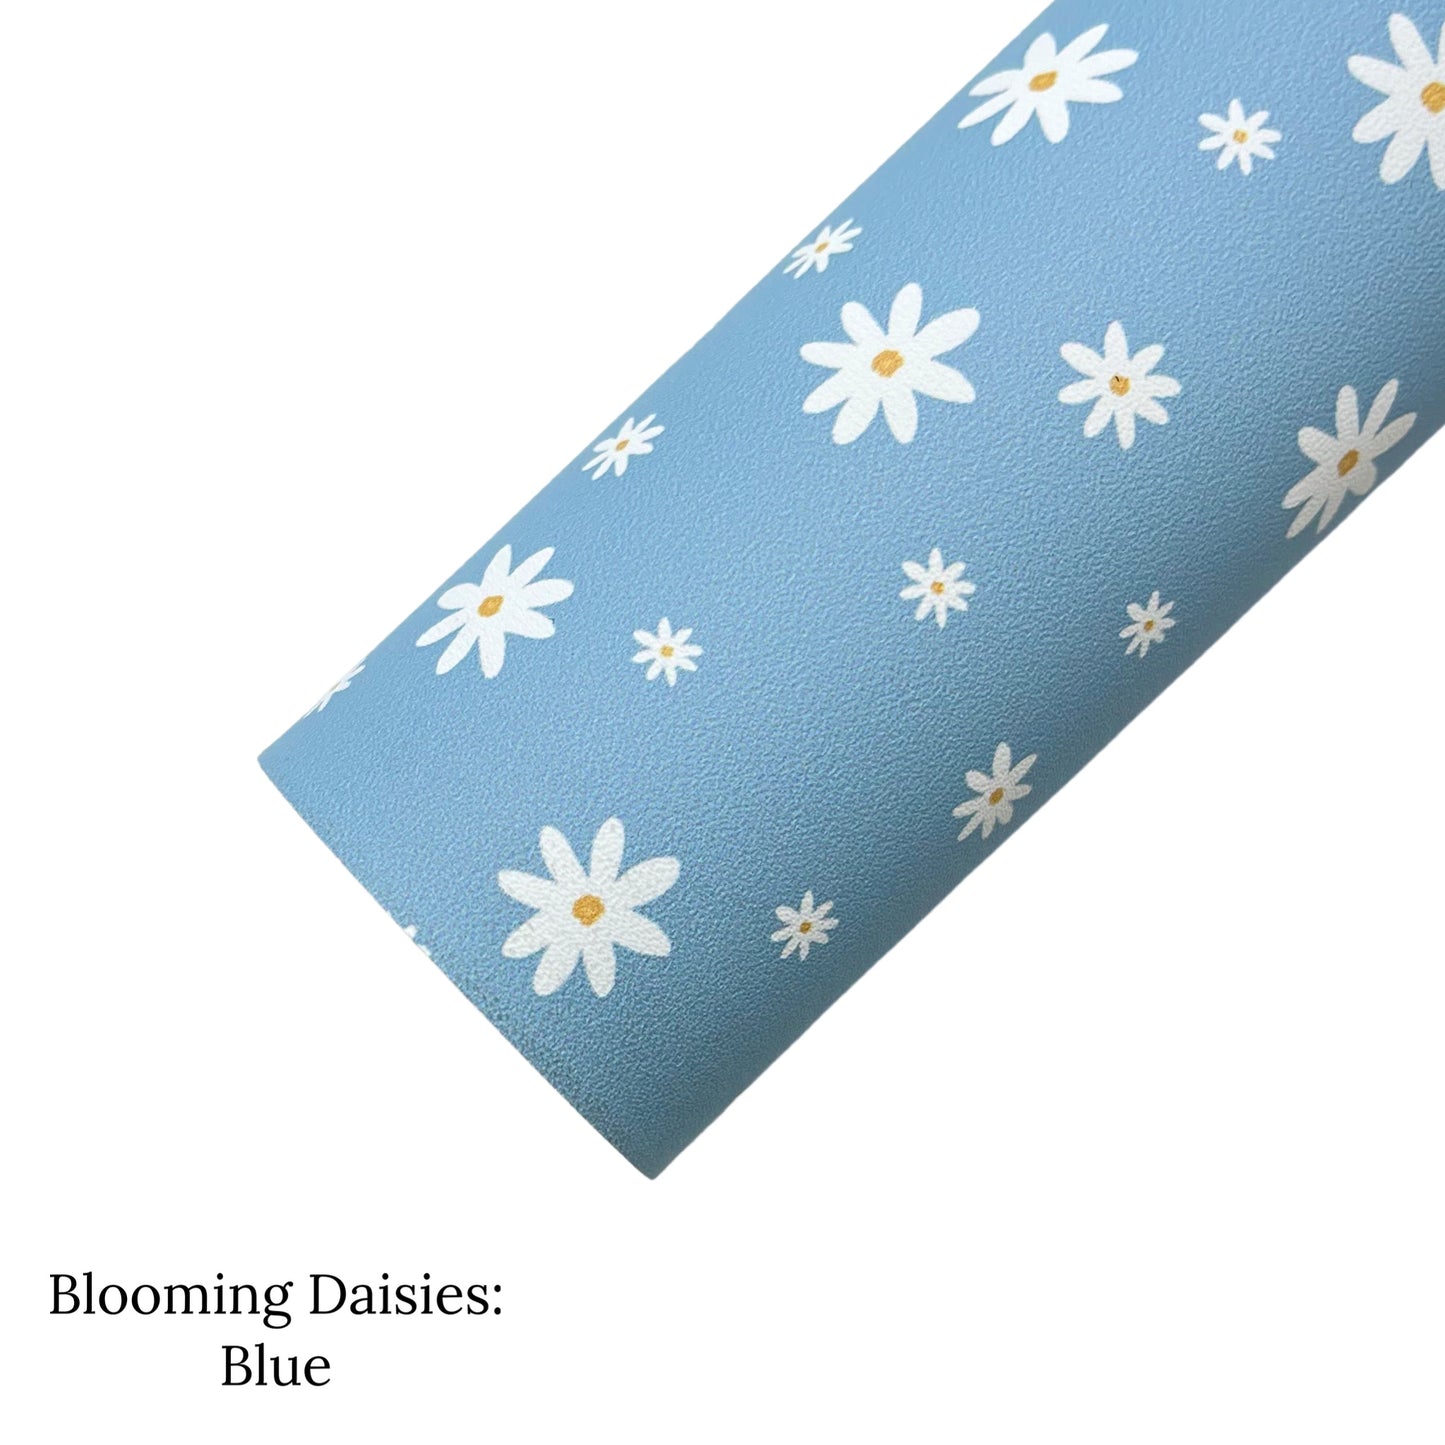 Rolled powder blue faux leather sheet with white and yellow daisy pattern.